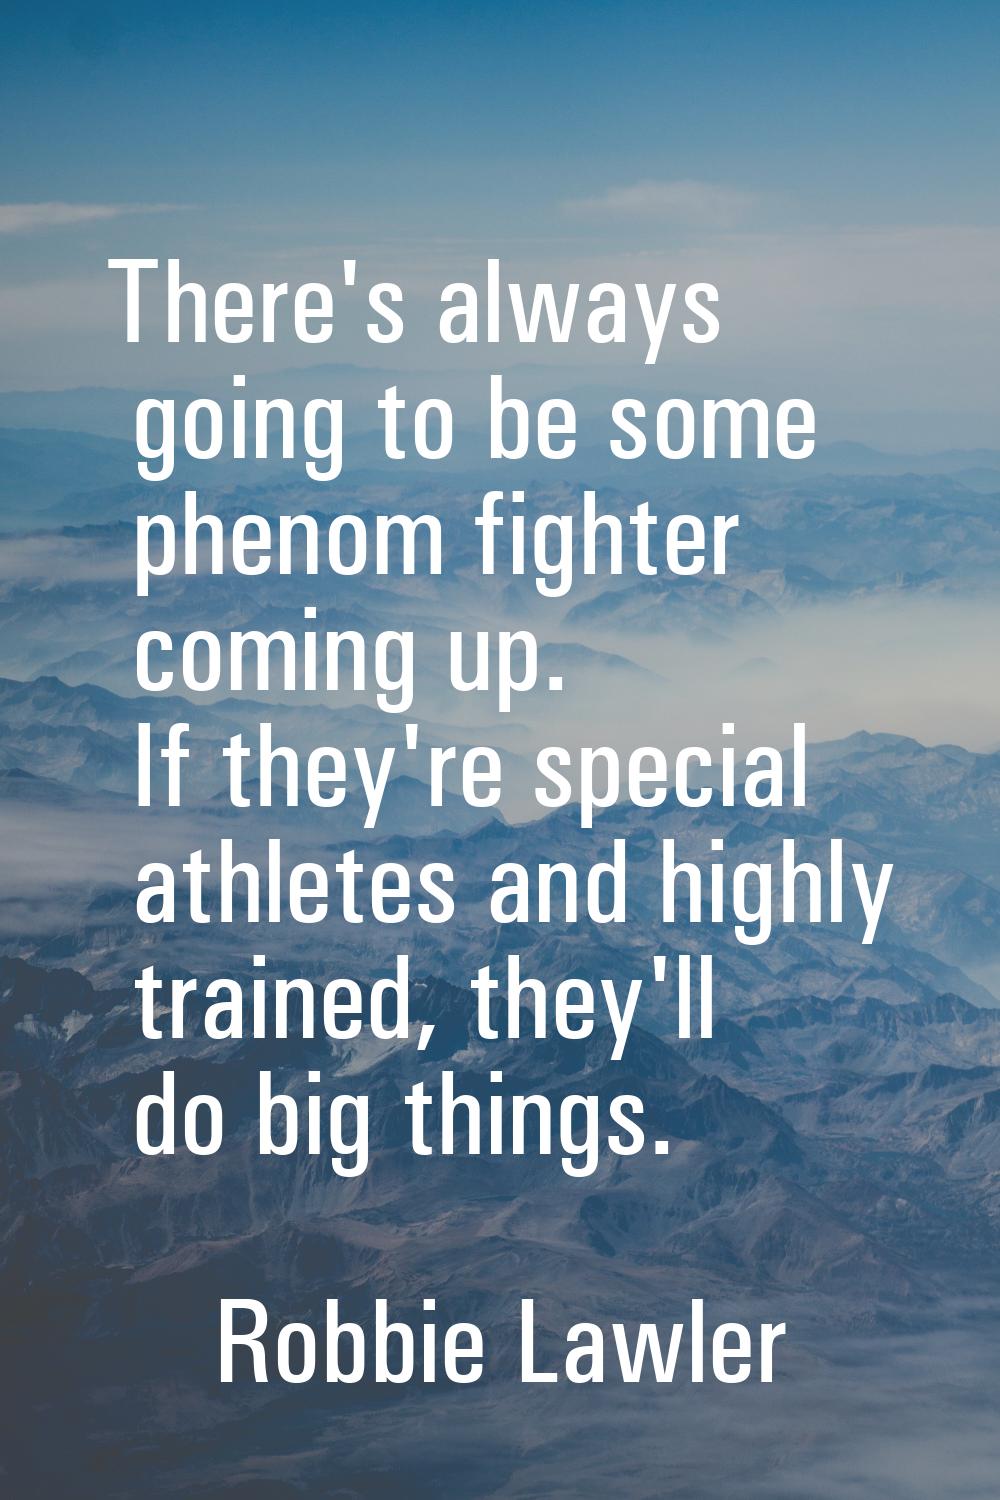 There's always going to be some phenom fighter coming up. If they're special athletes and highly tr